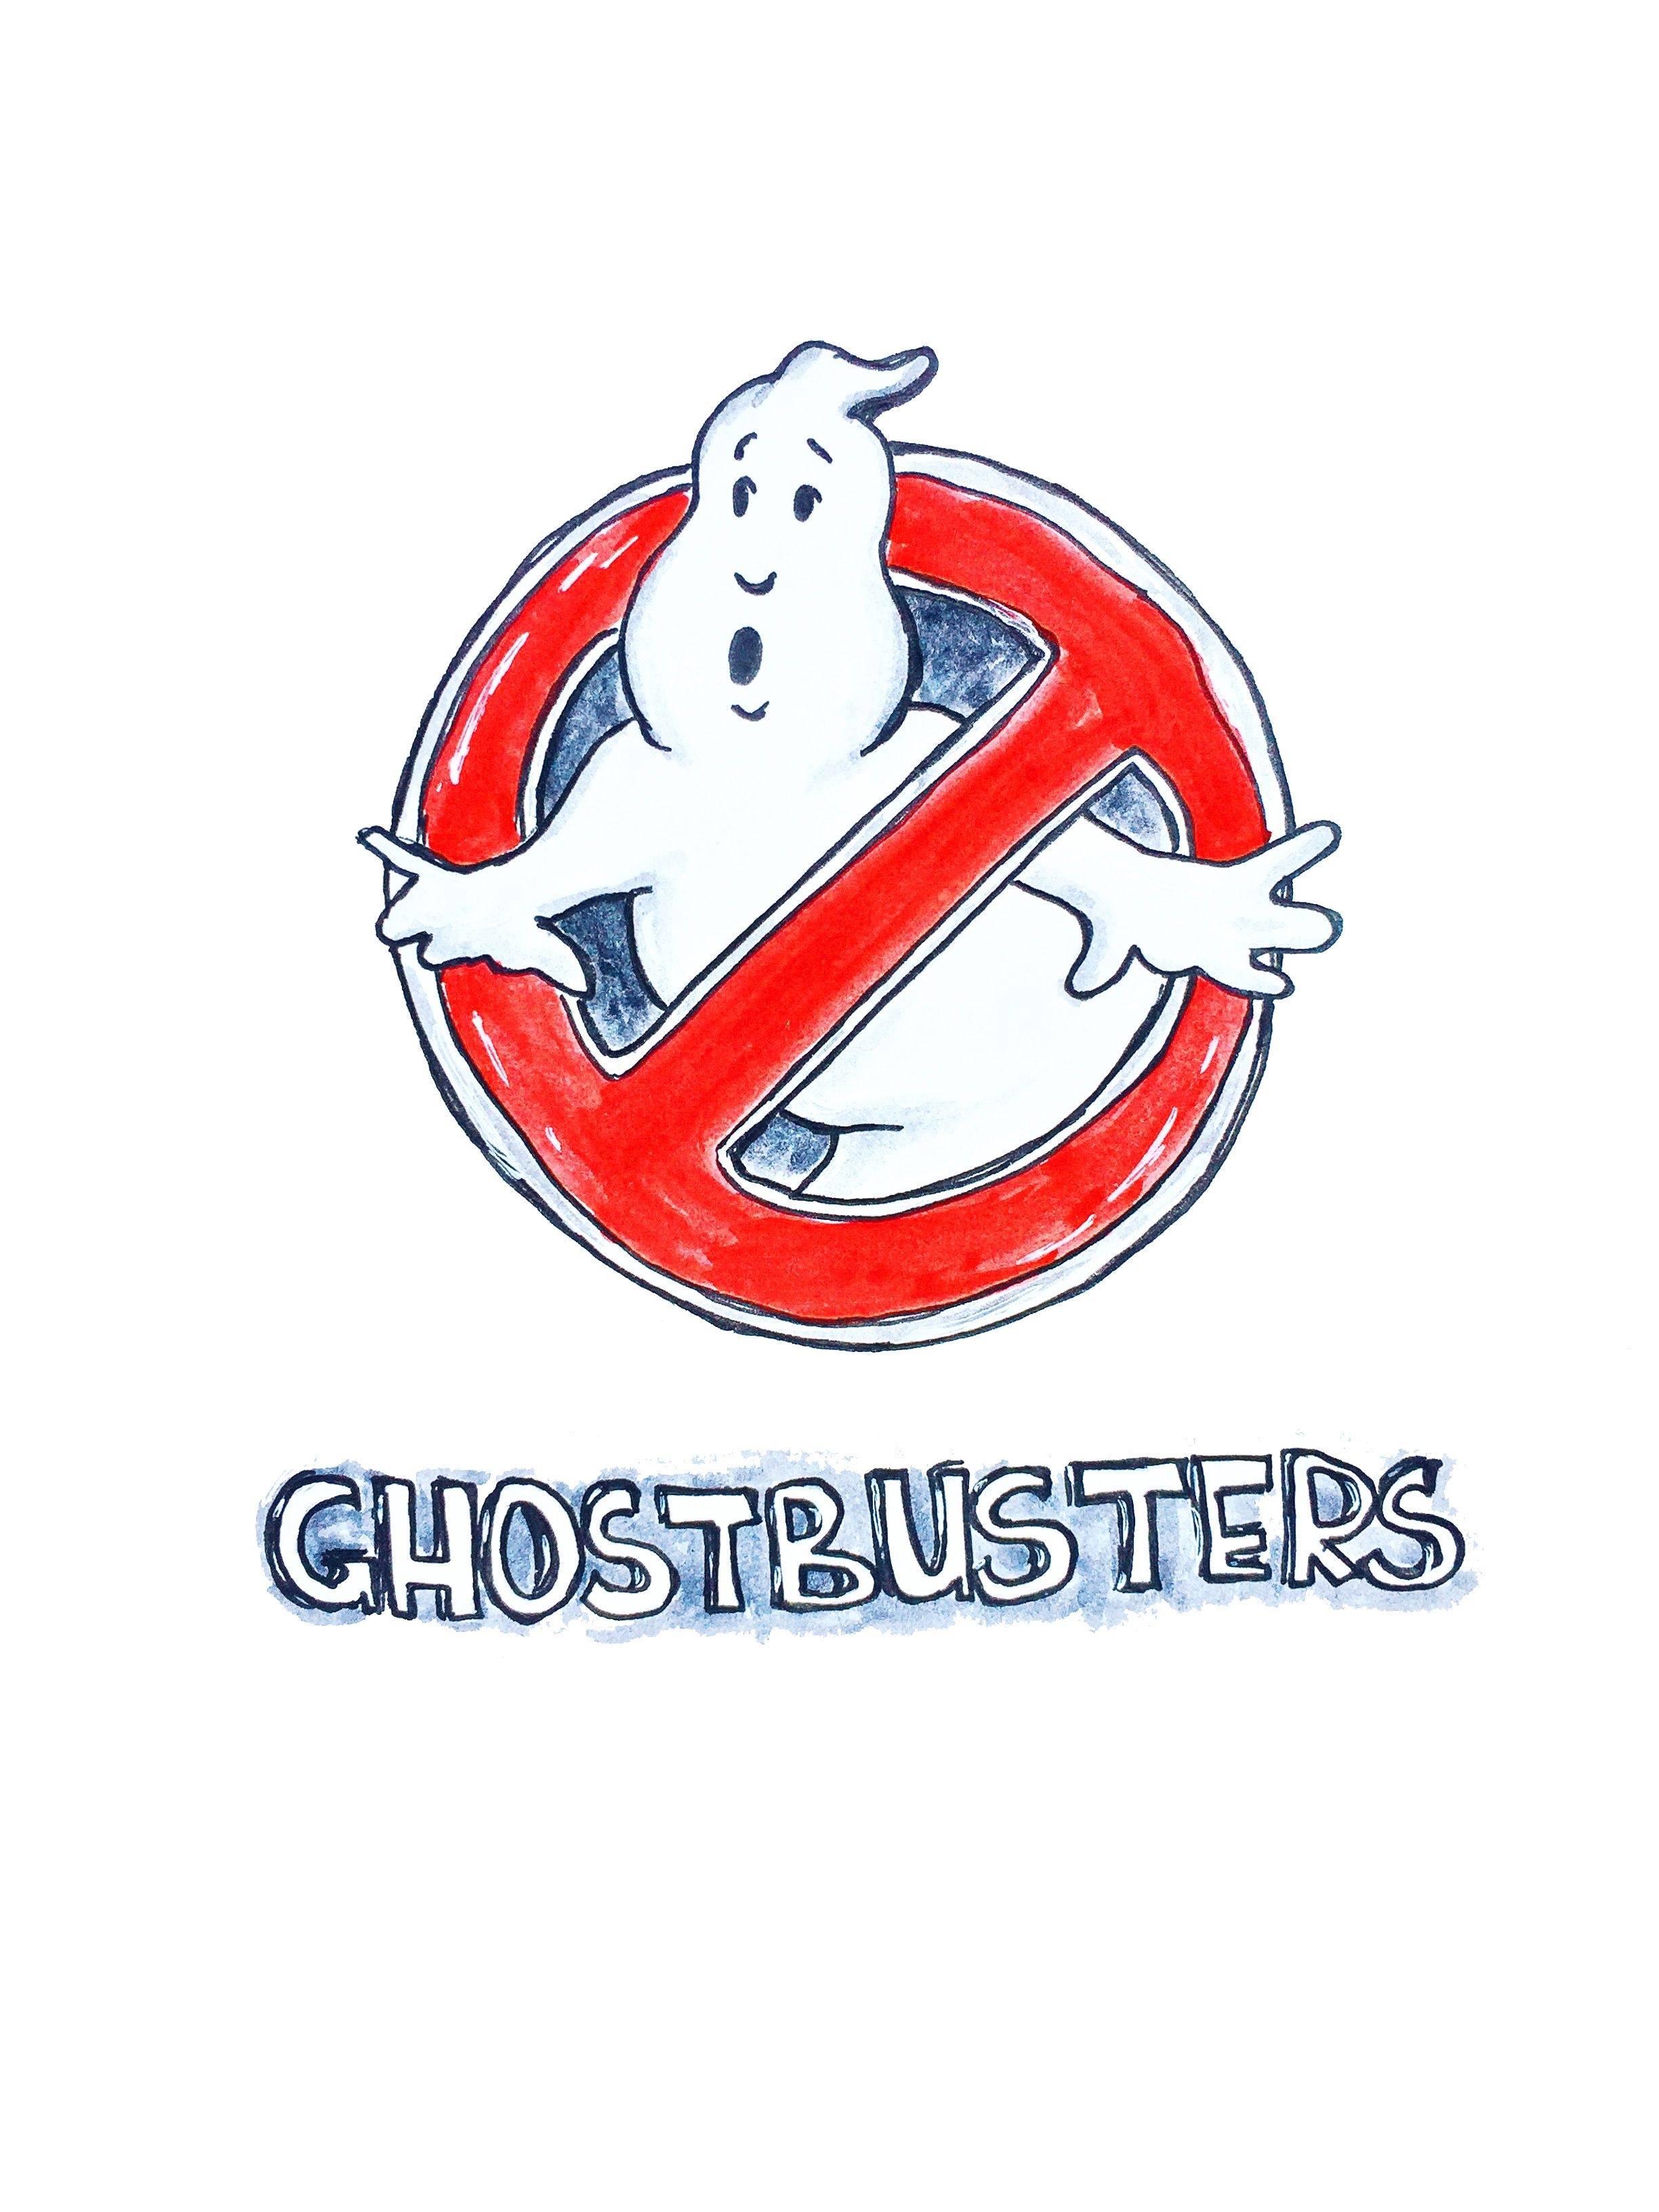 Ghostbusters Printable | For The Home | Ghostbusters Birthday Party - Ghostbusters Free Printables